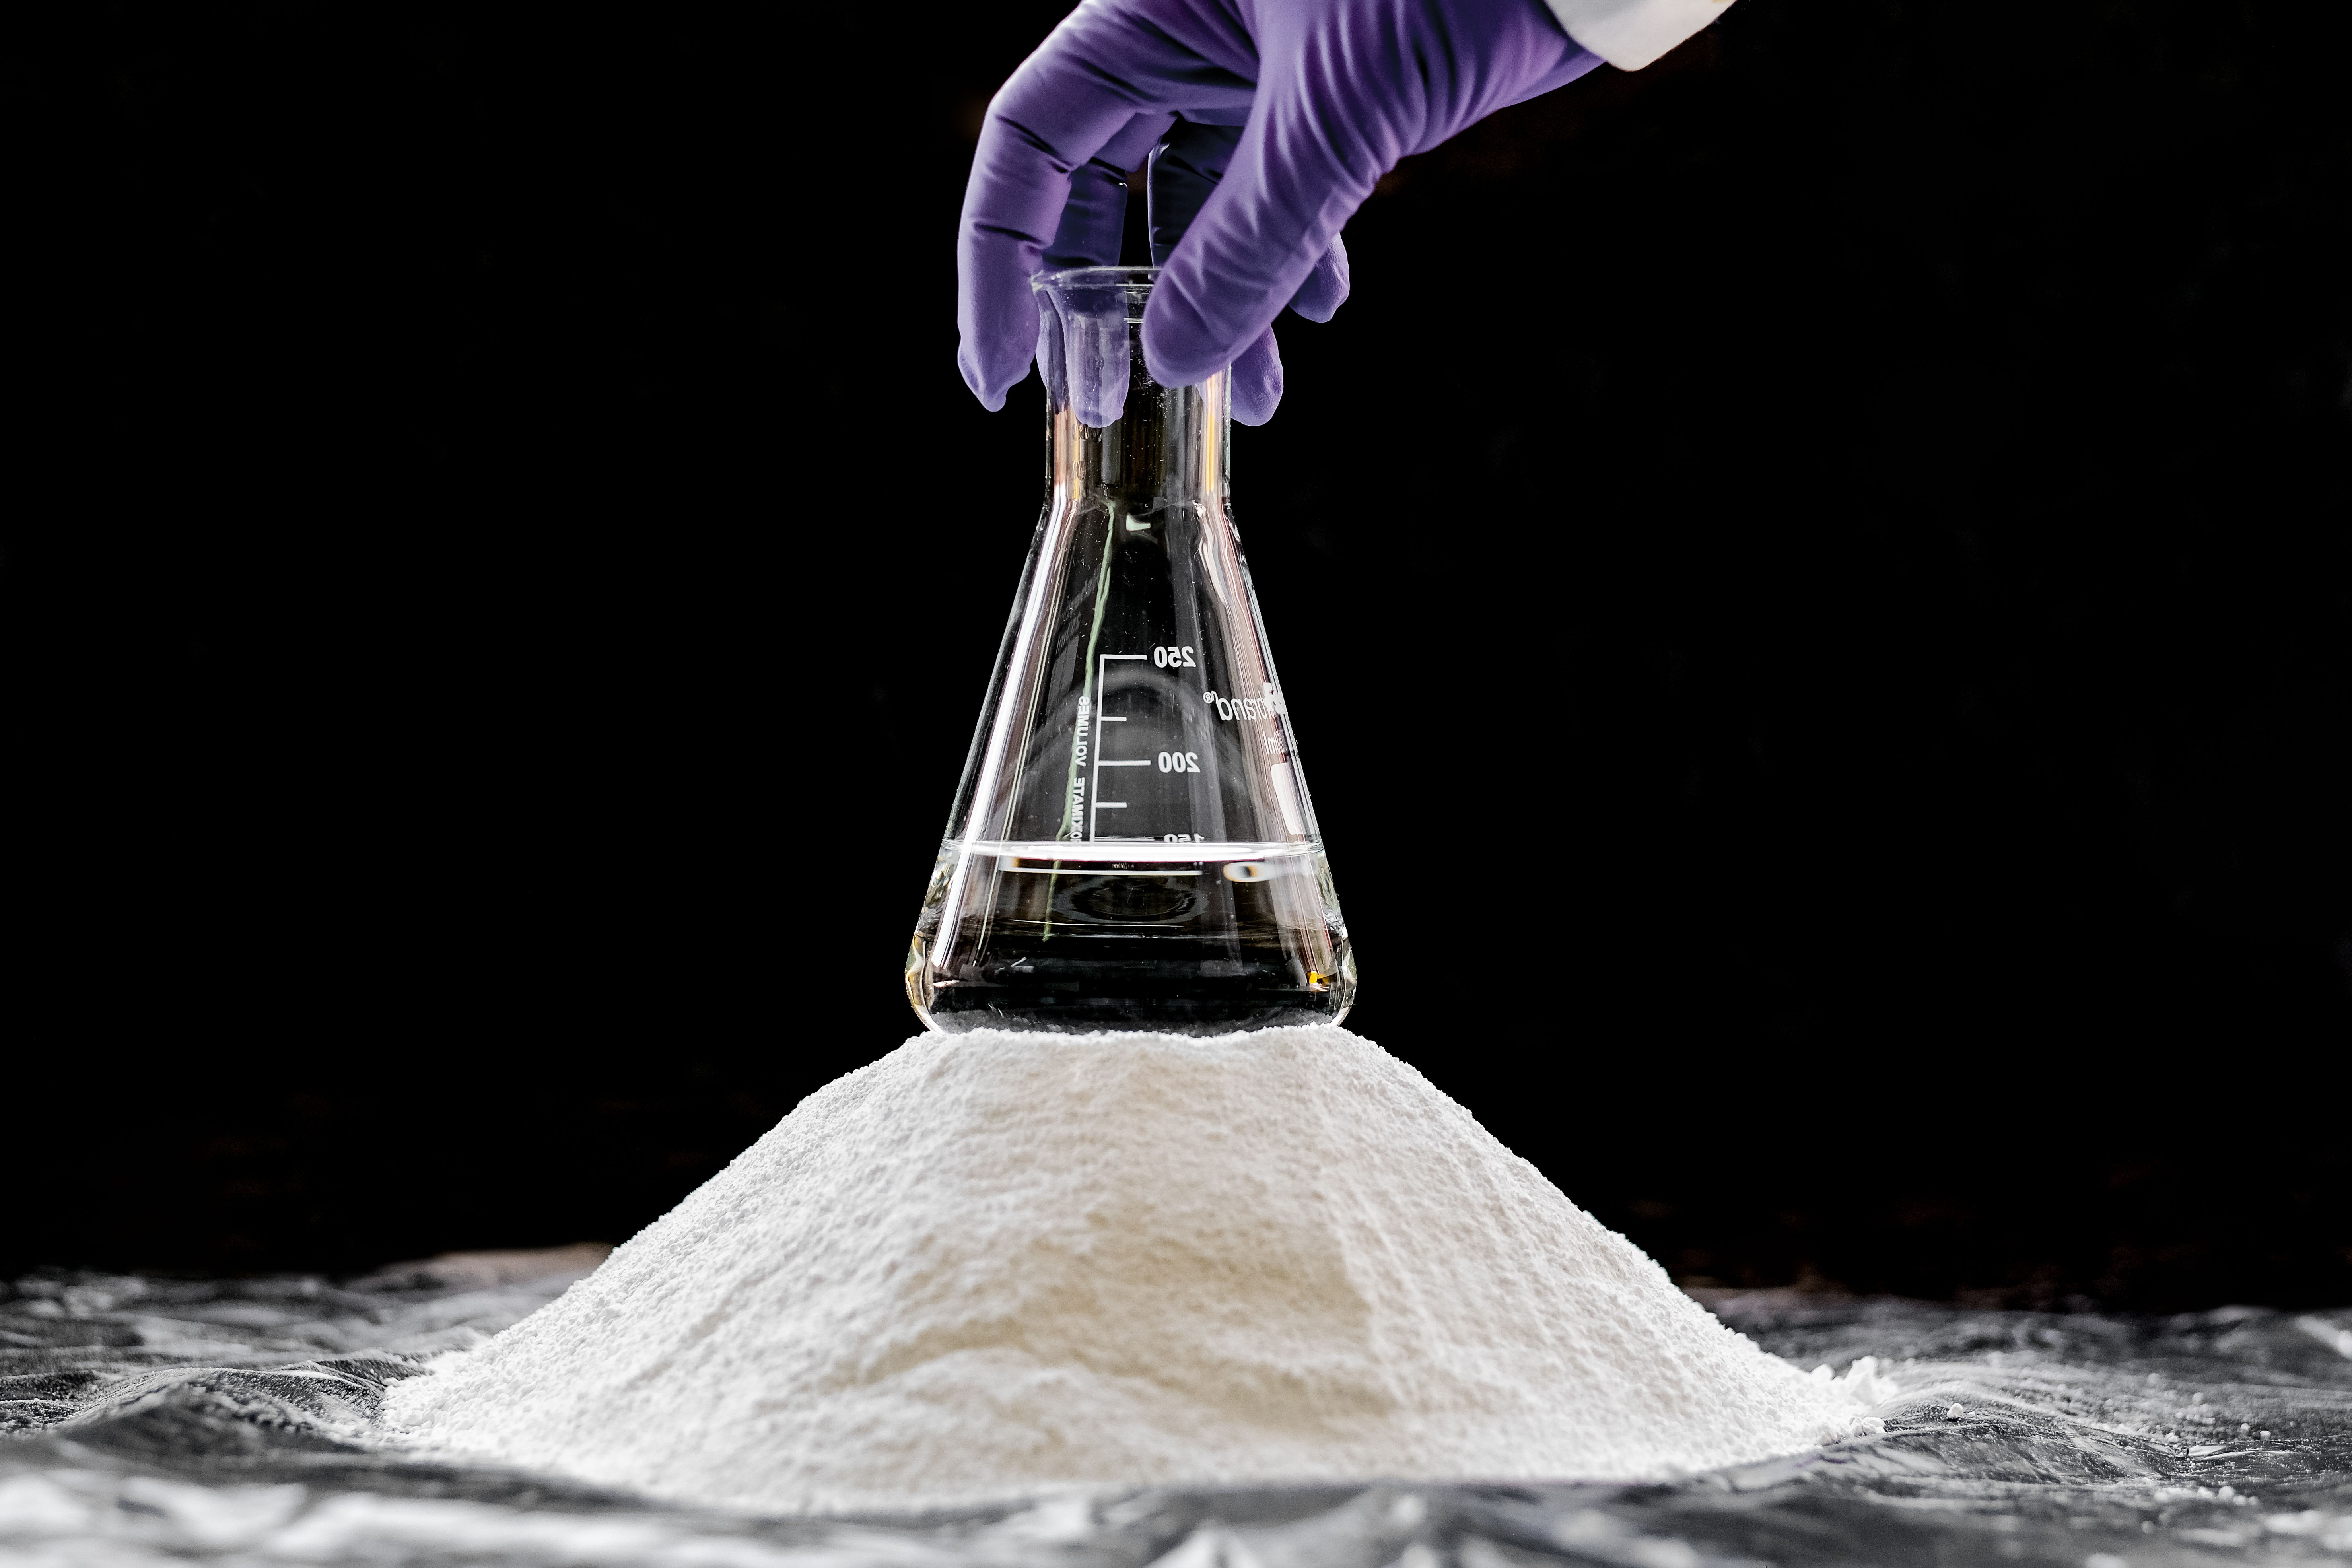 Purple gloved hand holds conical flask of liquid on top of mound of white powder against black background